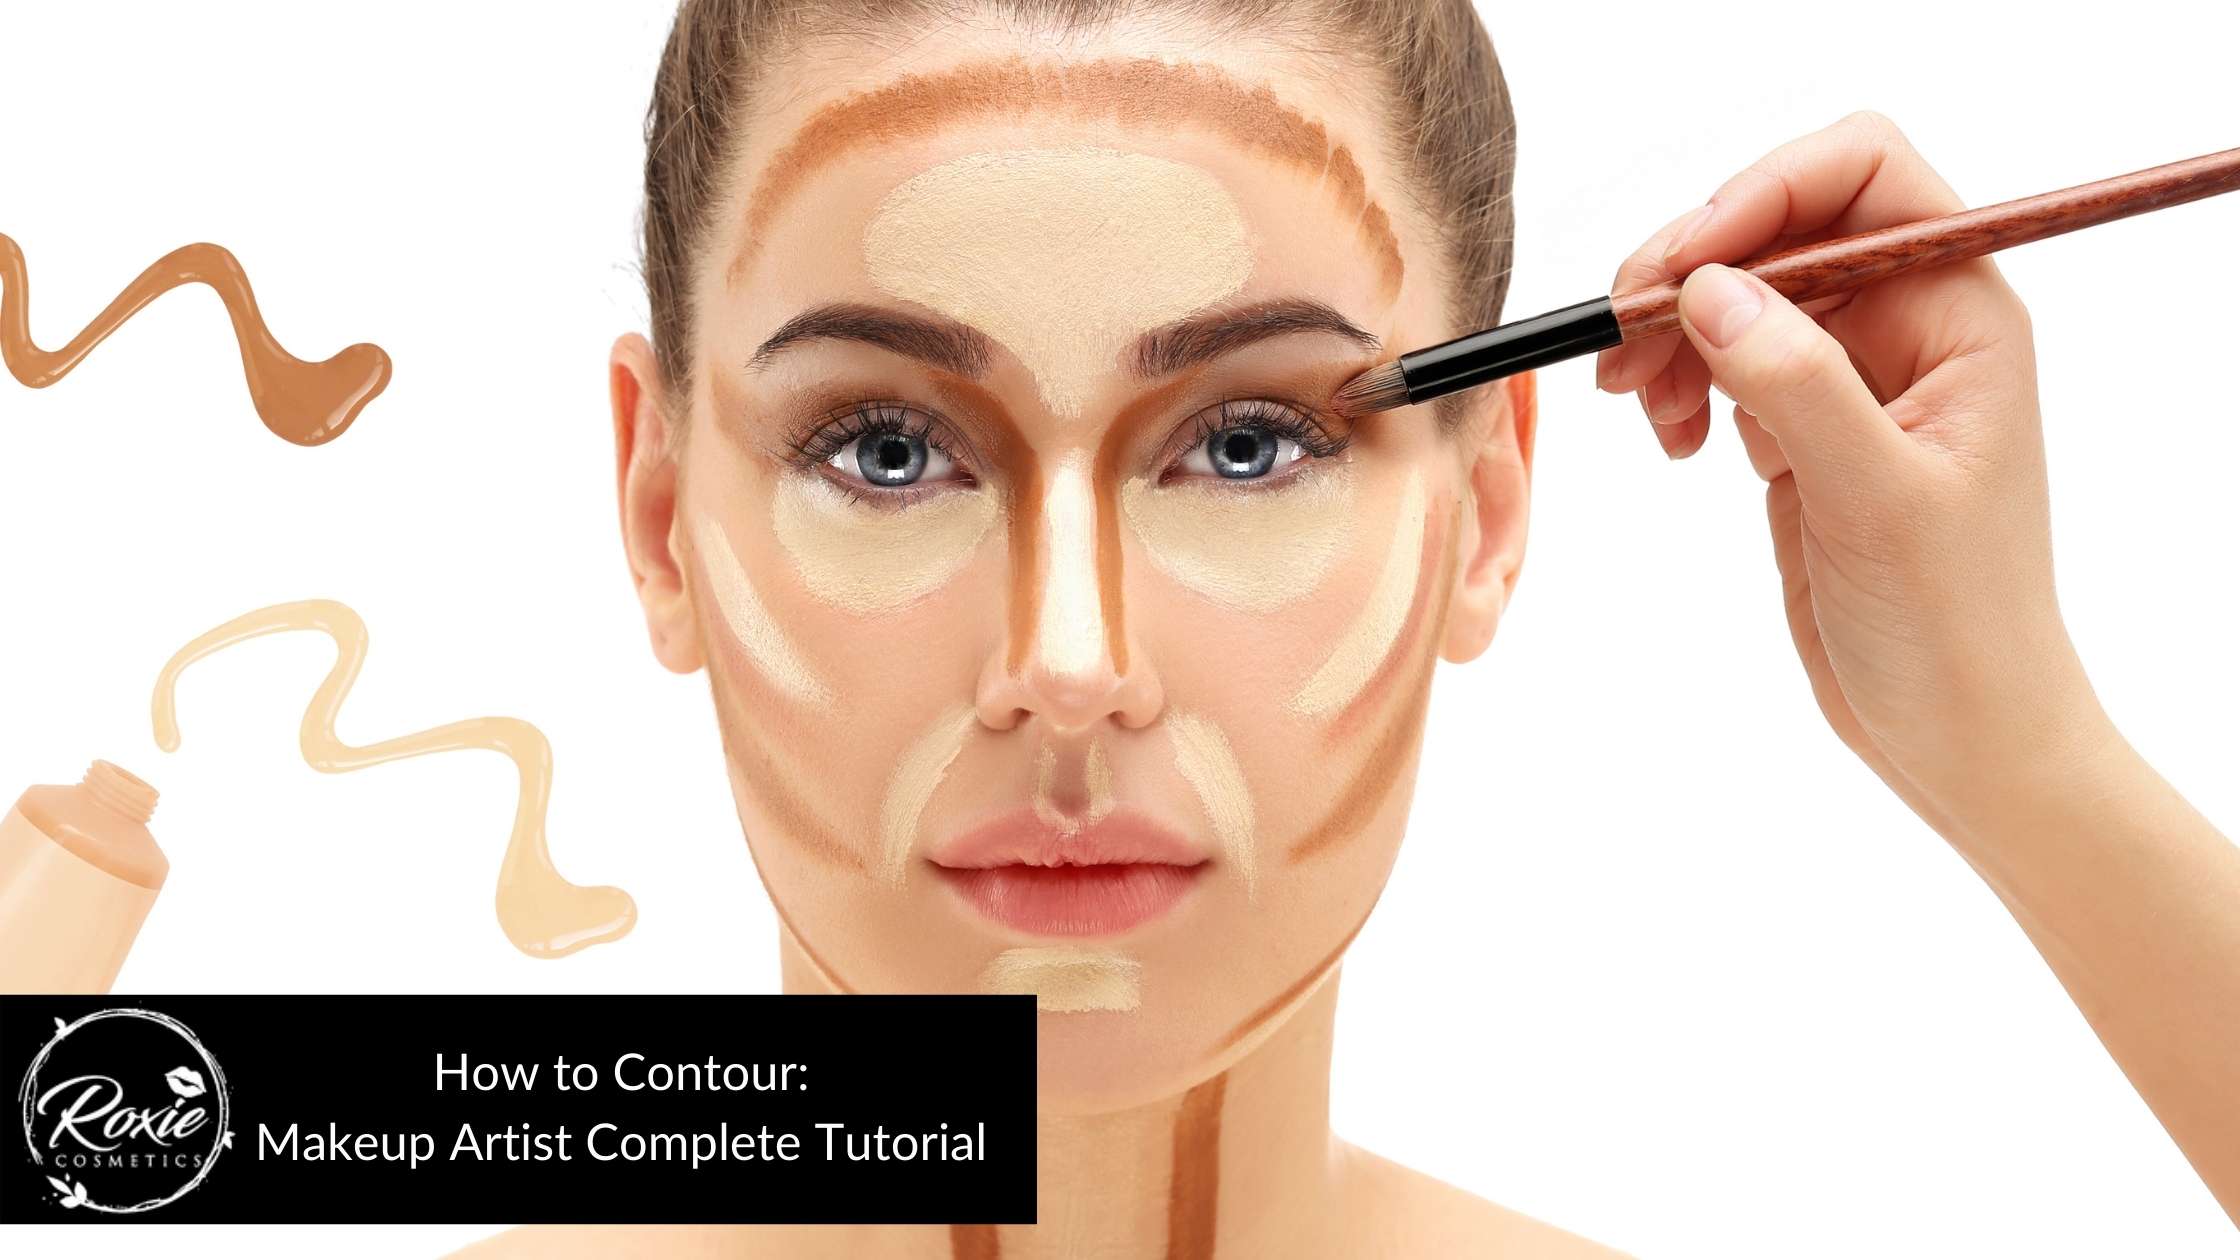 How to Contour: A Complete Tutorial From a Makeup Artist – Roxie